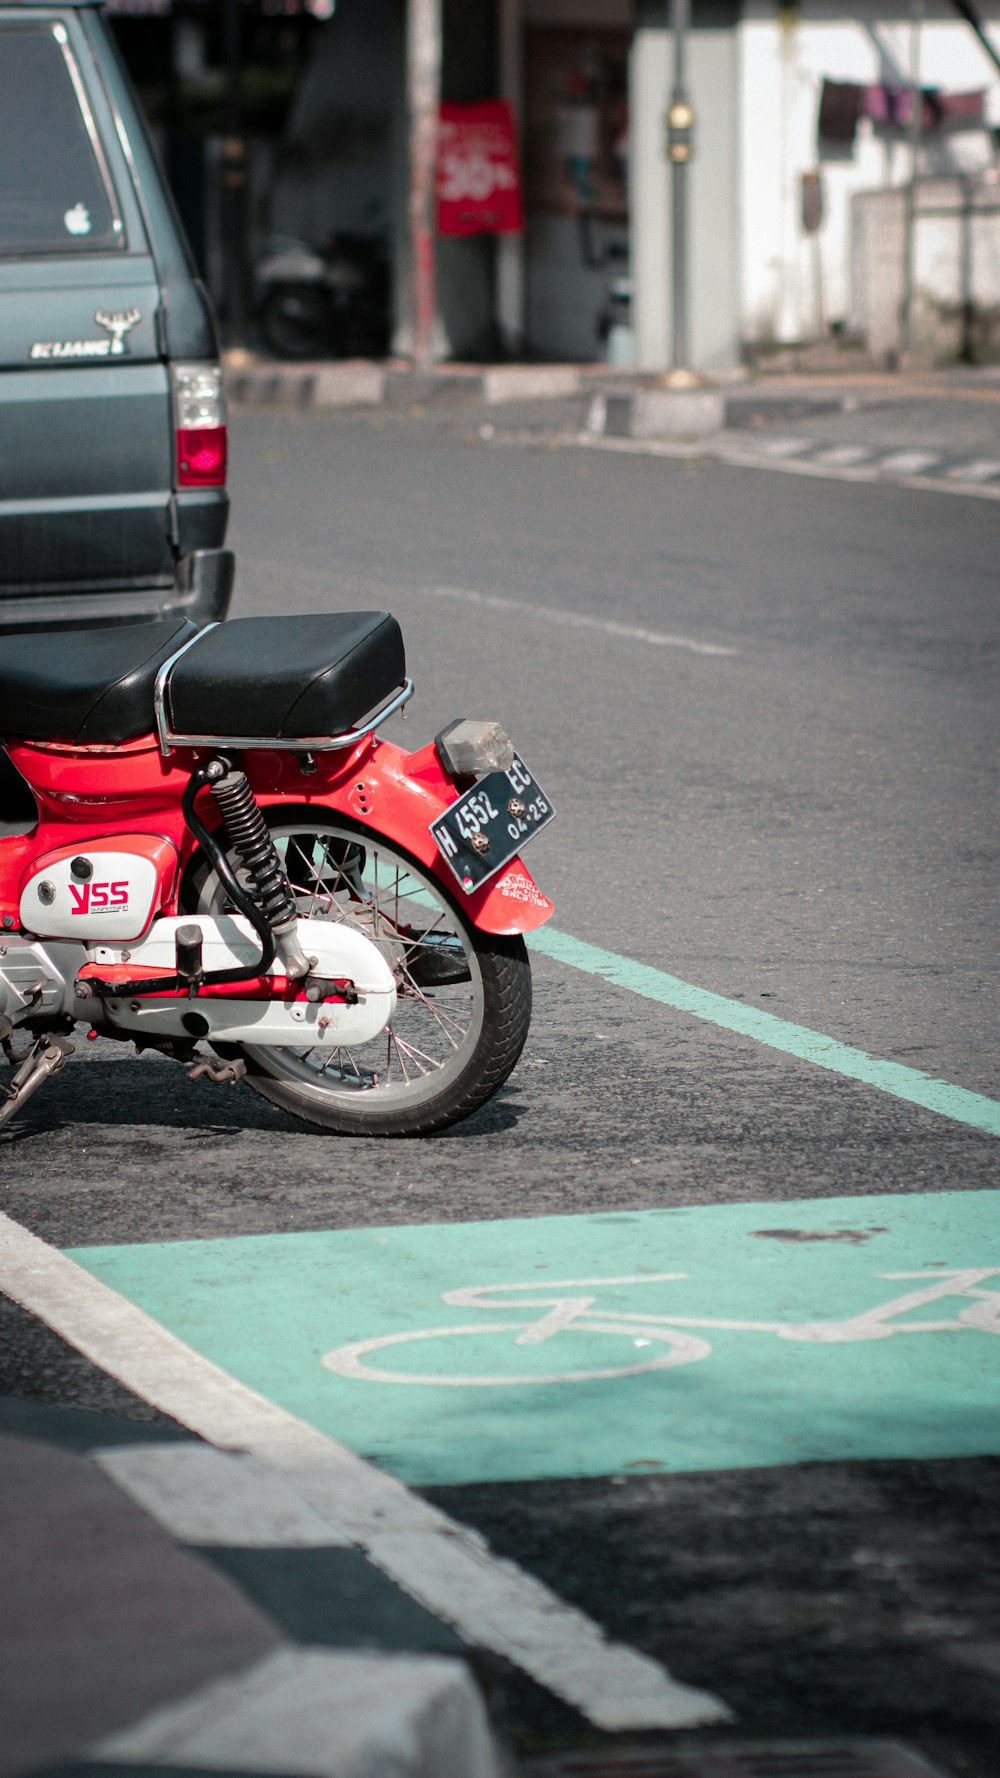 a red motorcycle parked on the side of the road